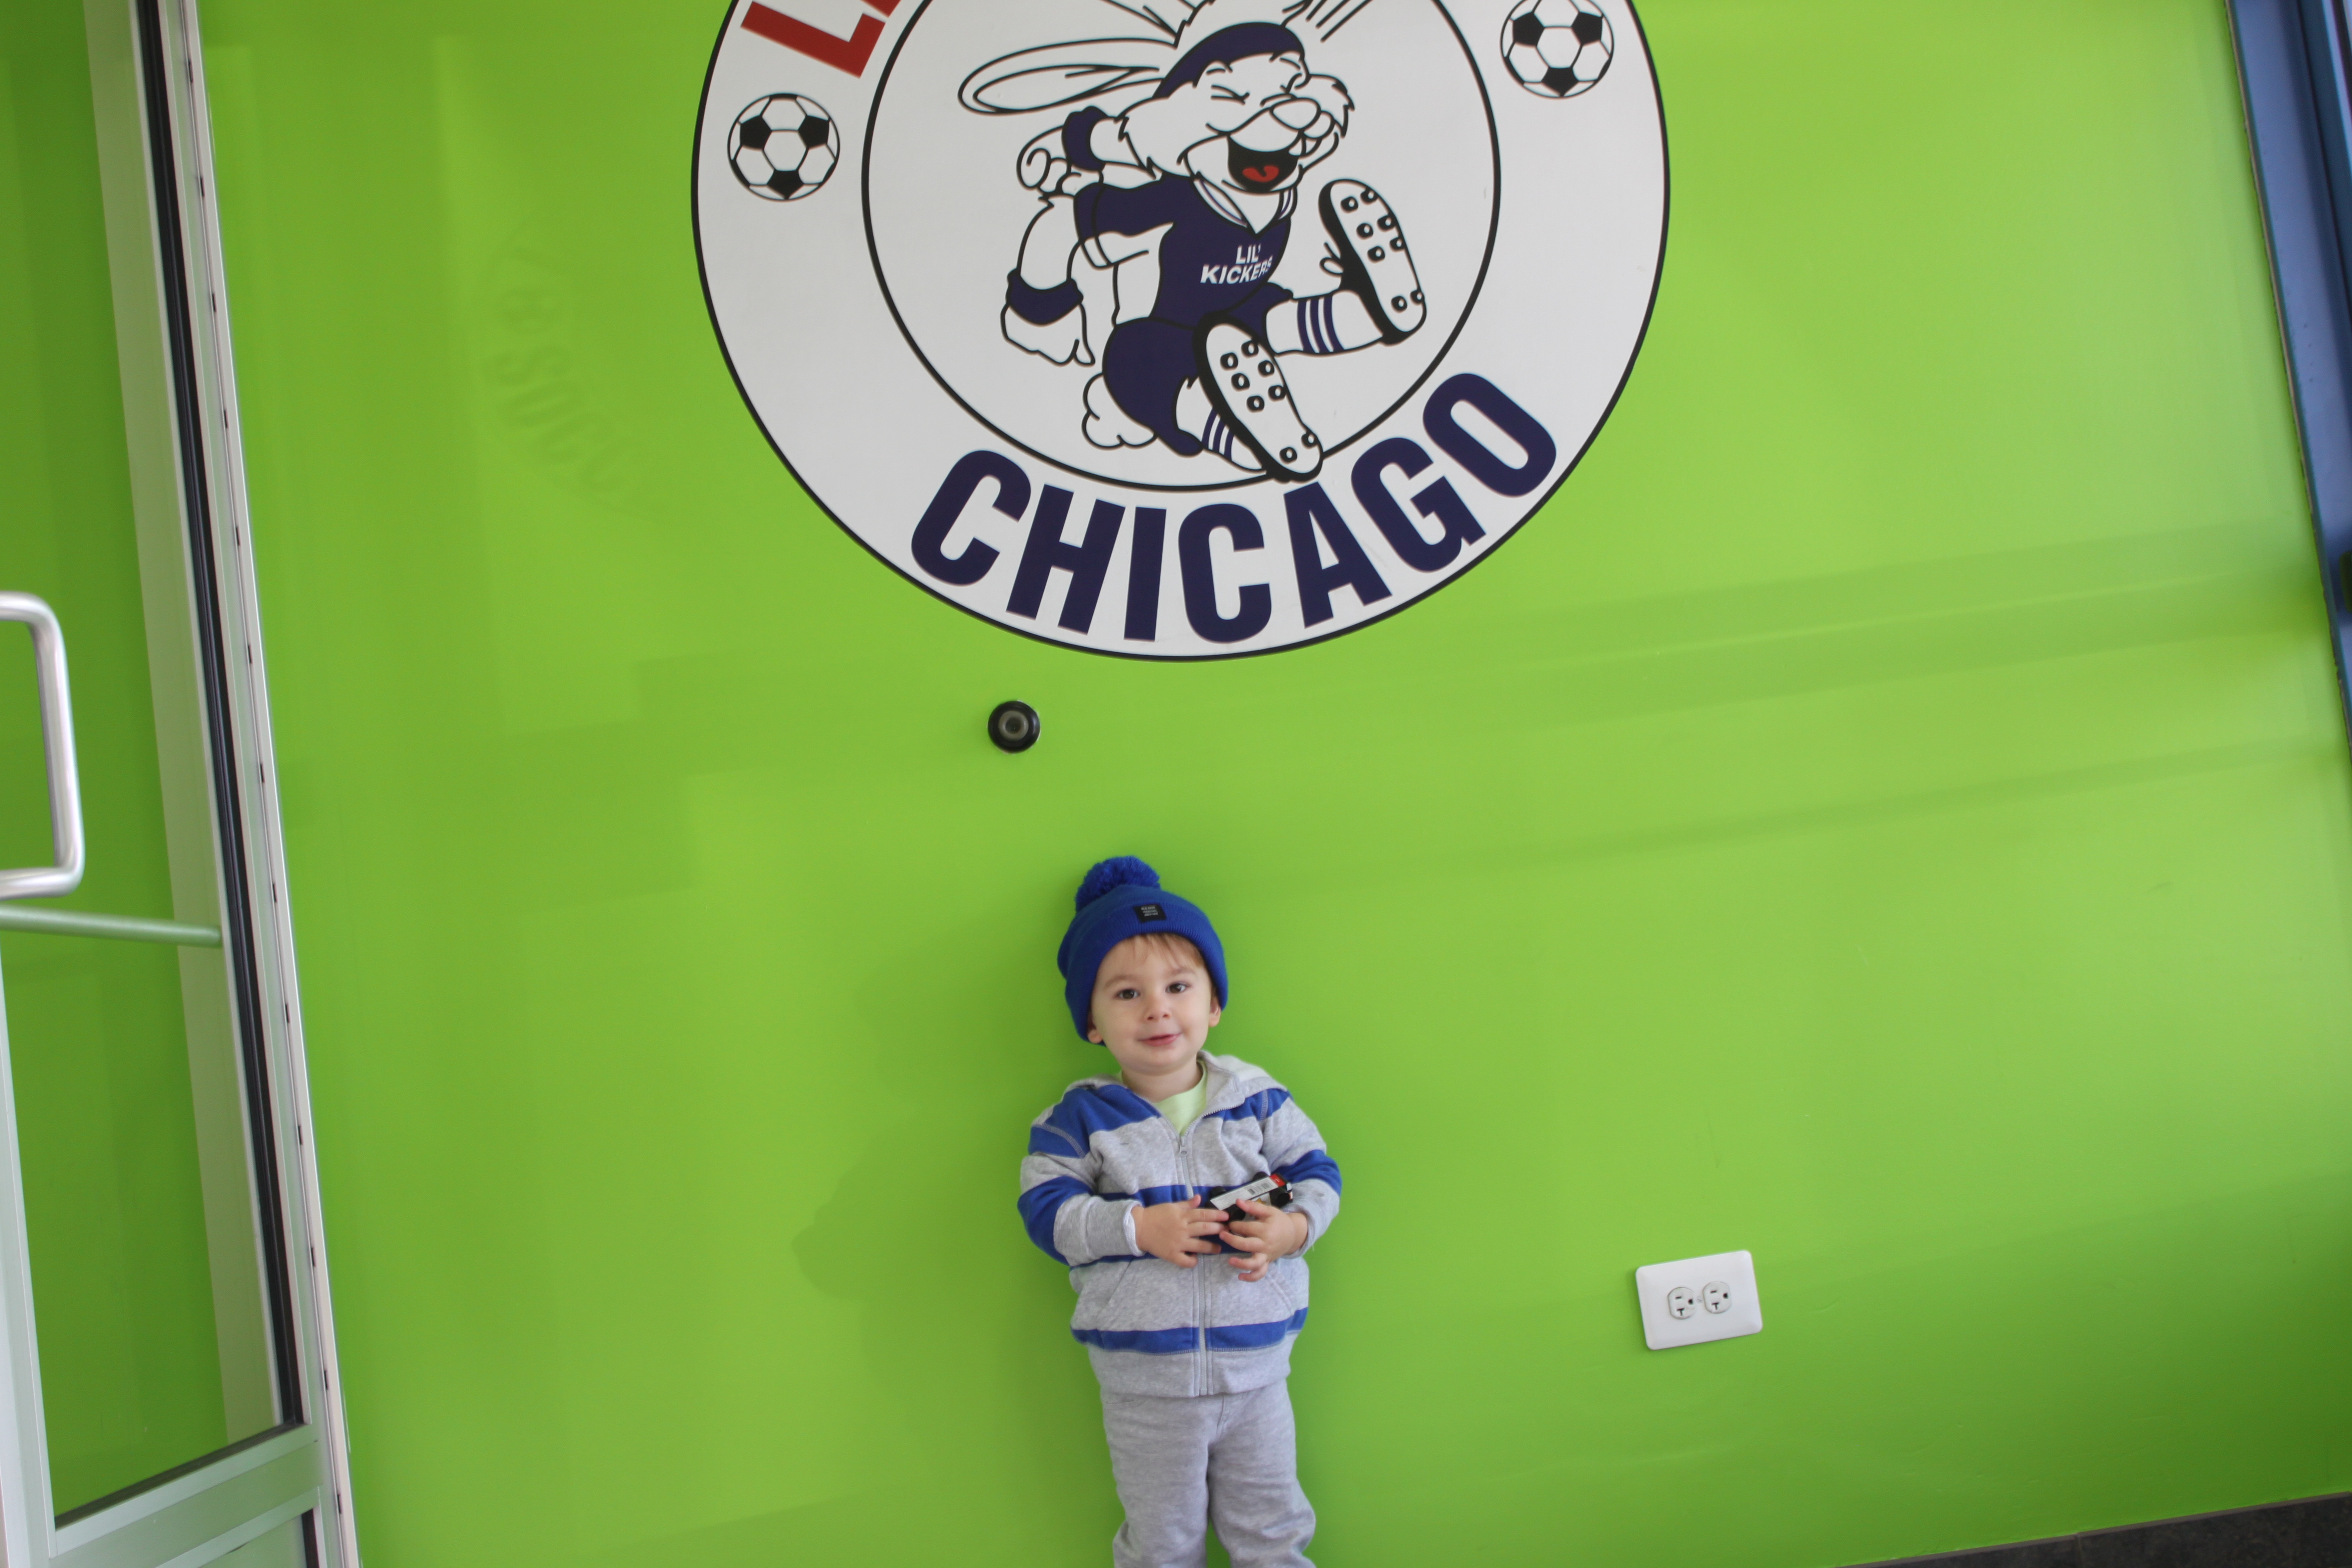 Soccer lessons at Lil' Kickers